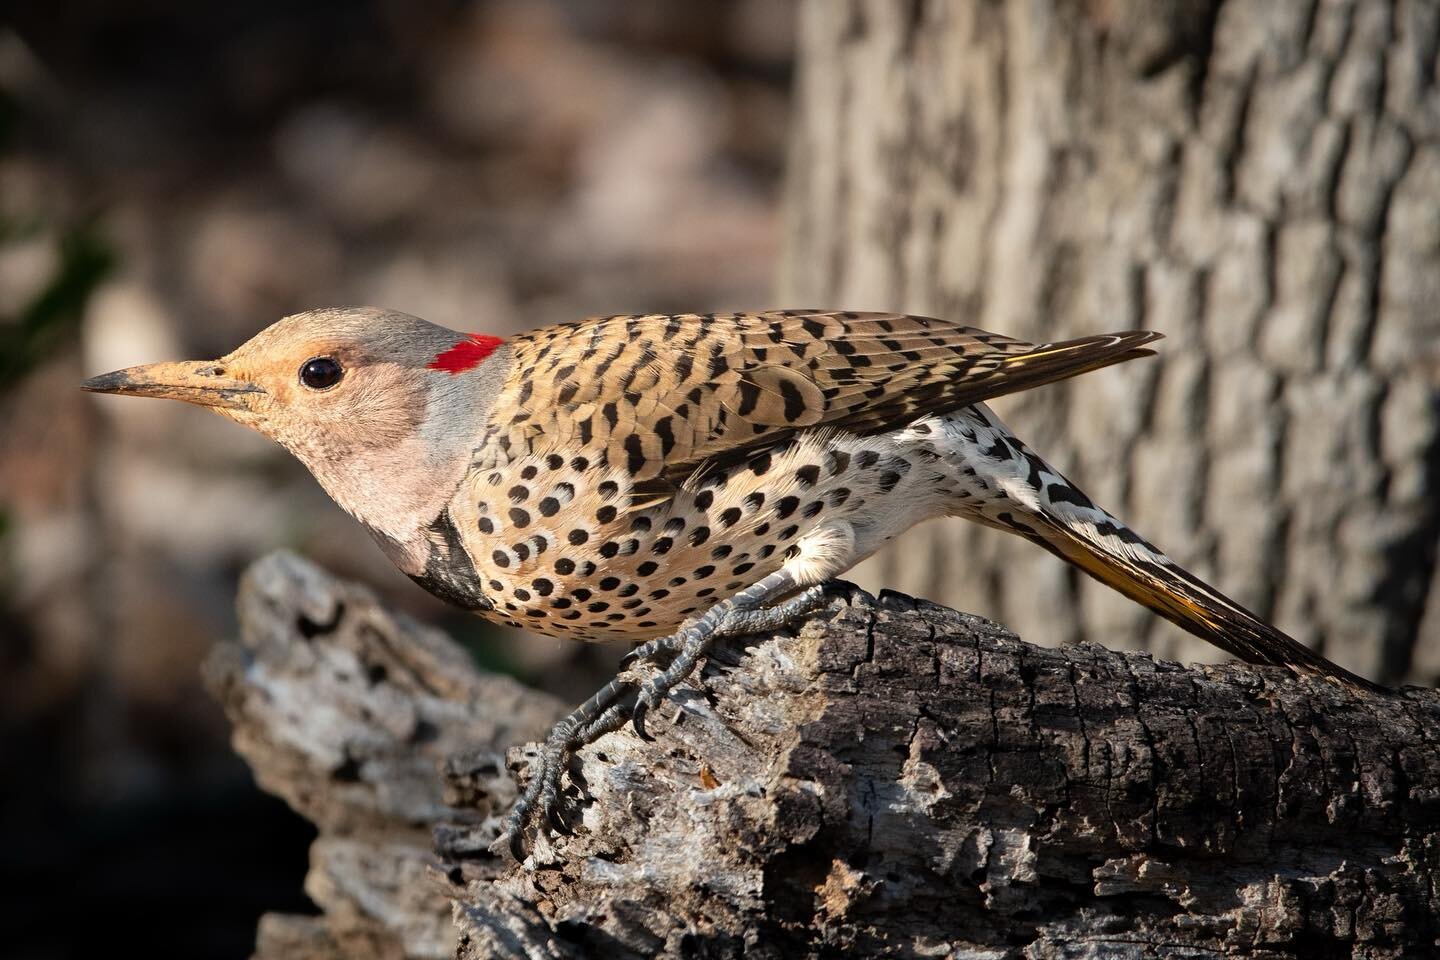 SWIPE 👉🏼 for a close up

A northern flicker, a type of large woodpecker, uses her tail to balance on a dead log she is feeding from. As I grew up in Oklahoma I&rsquo;ve always loved watching these birds. There are so many variations in color and ma